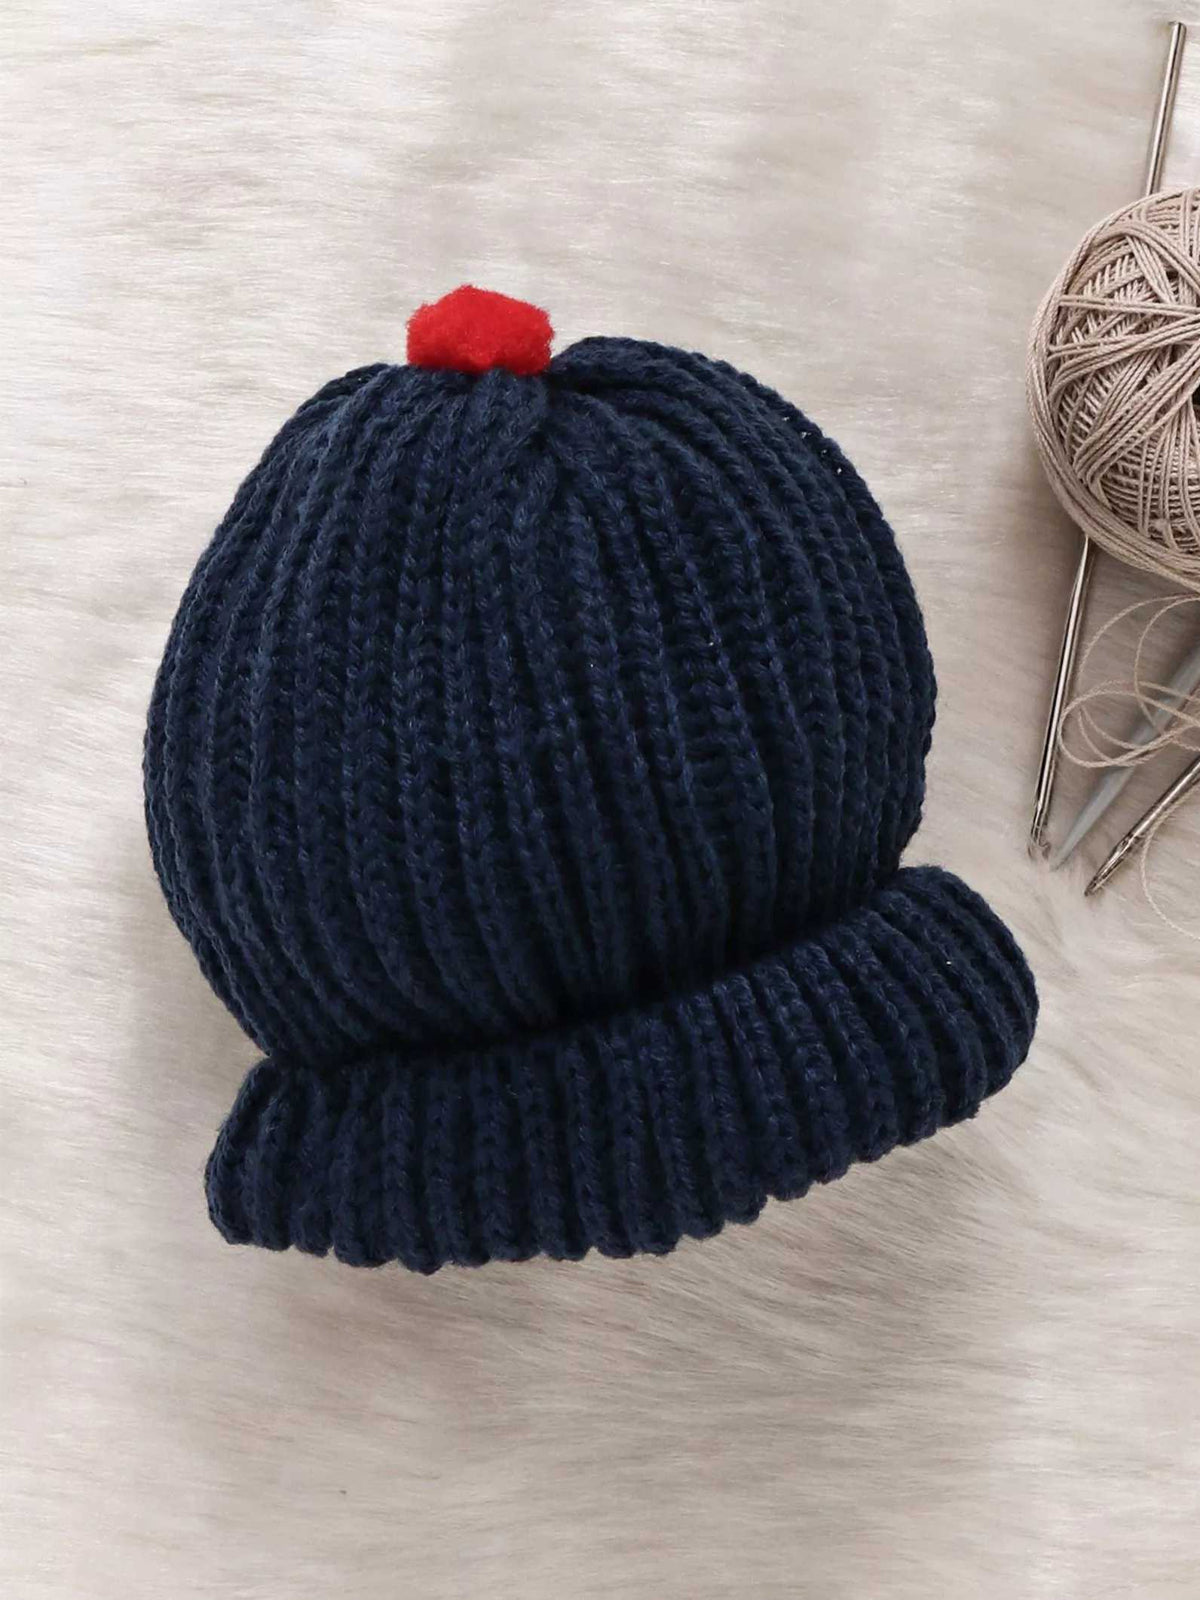 Soft and Comfortable Round Cap with Pom Pom for baby - Navy color